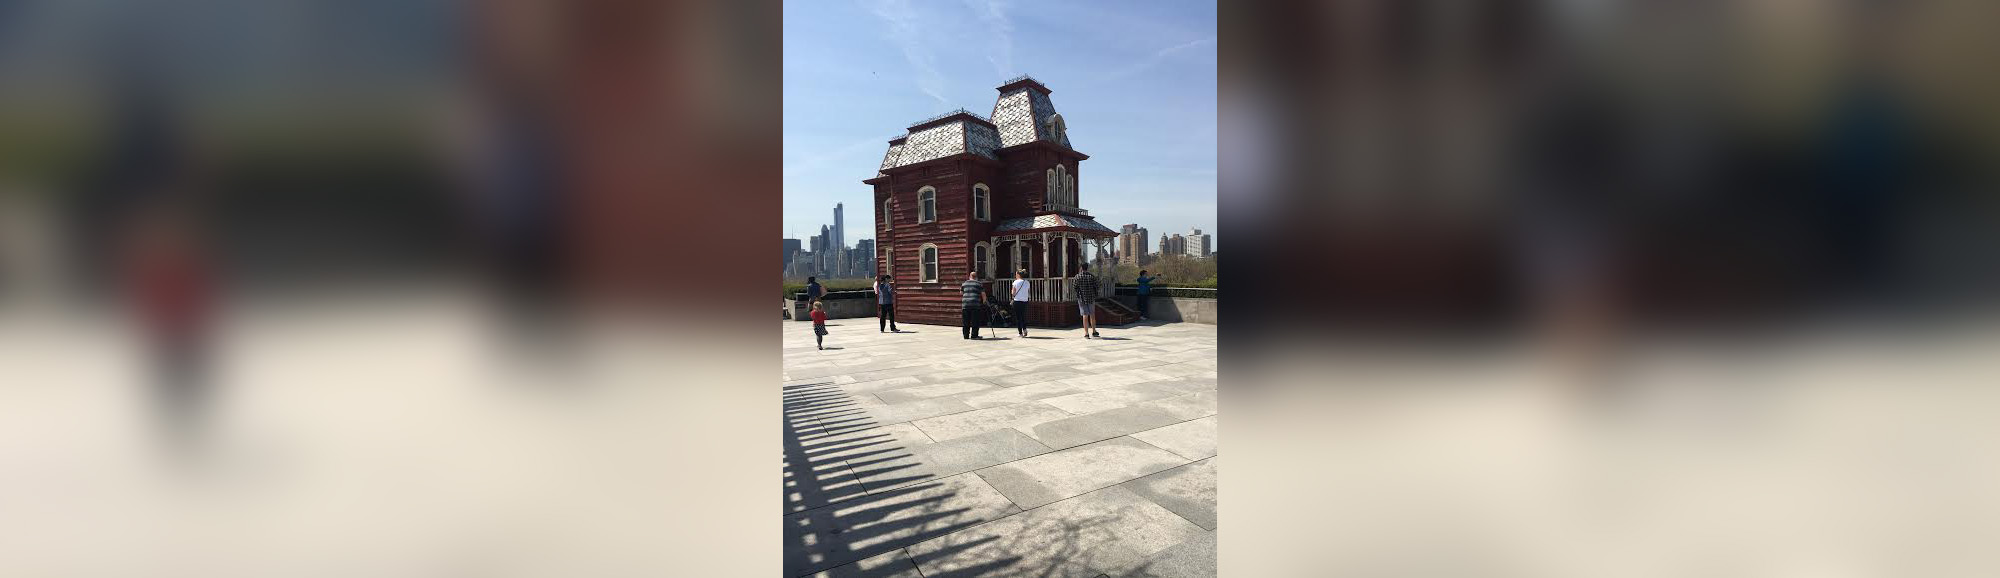 PHOTO: Transitional Object (PsychoBarn), a large-scale sculpture by acclaimed British artist Cornelia Parker, is on view now atop the roof of the Metropolitan Museum of Art in New York City.